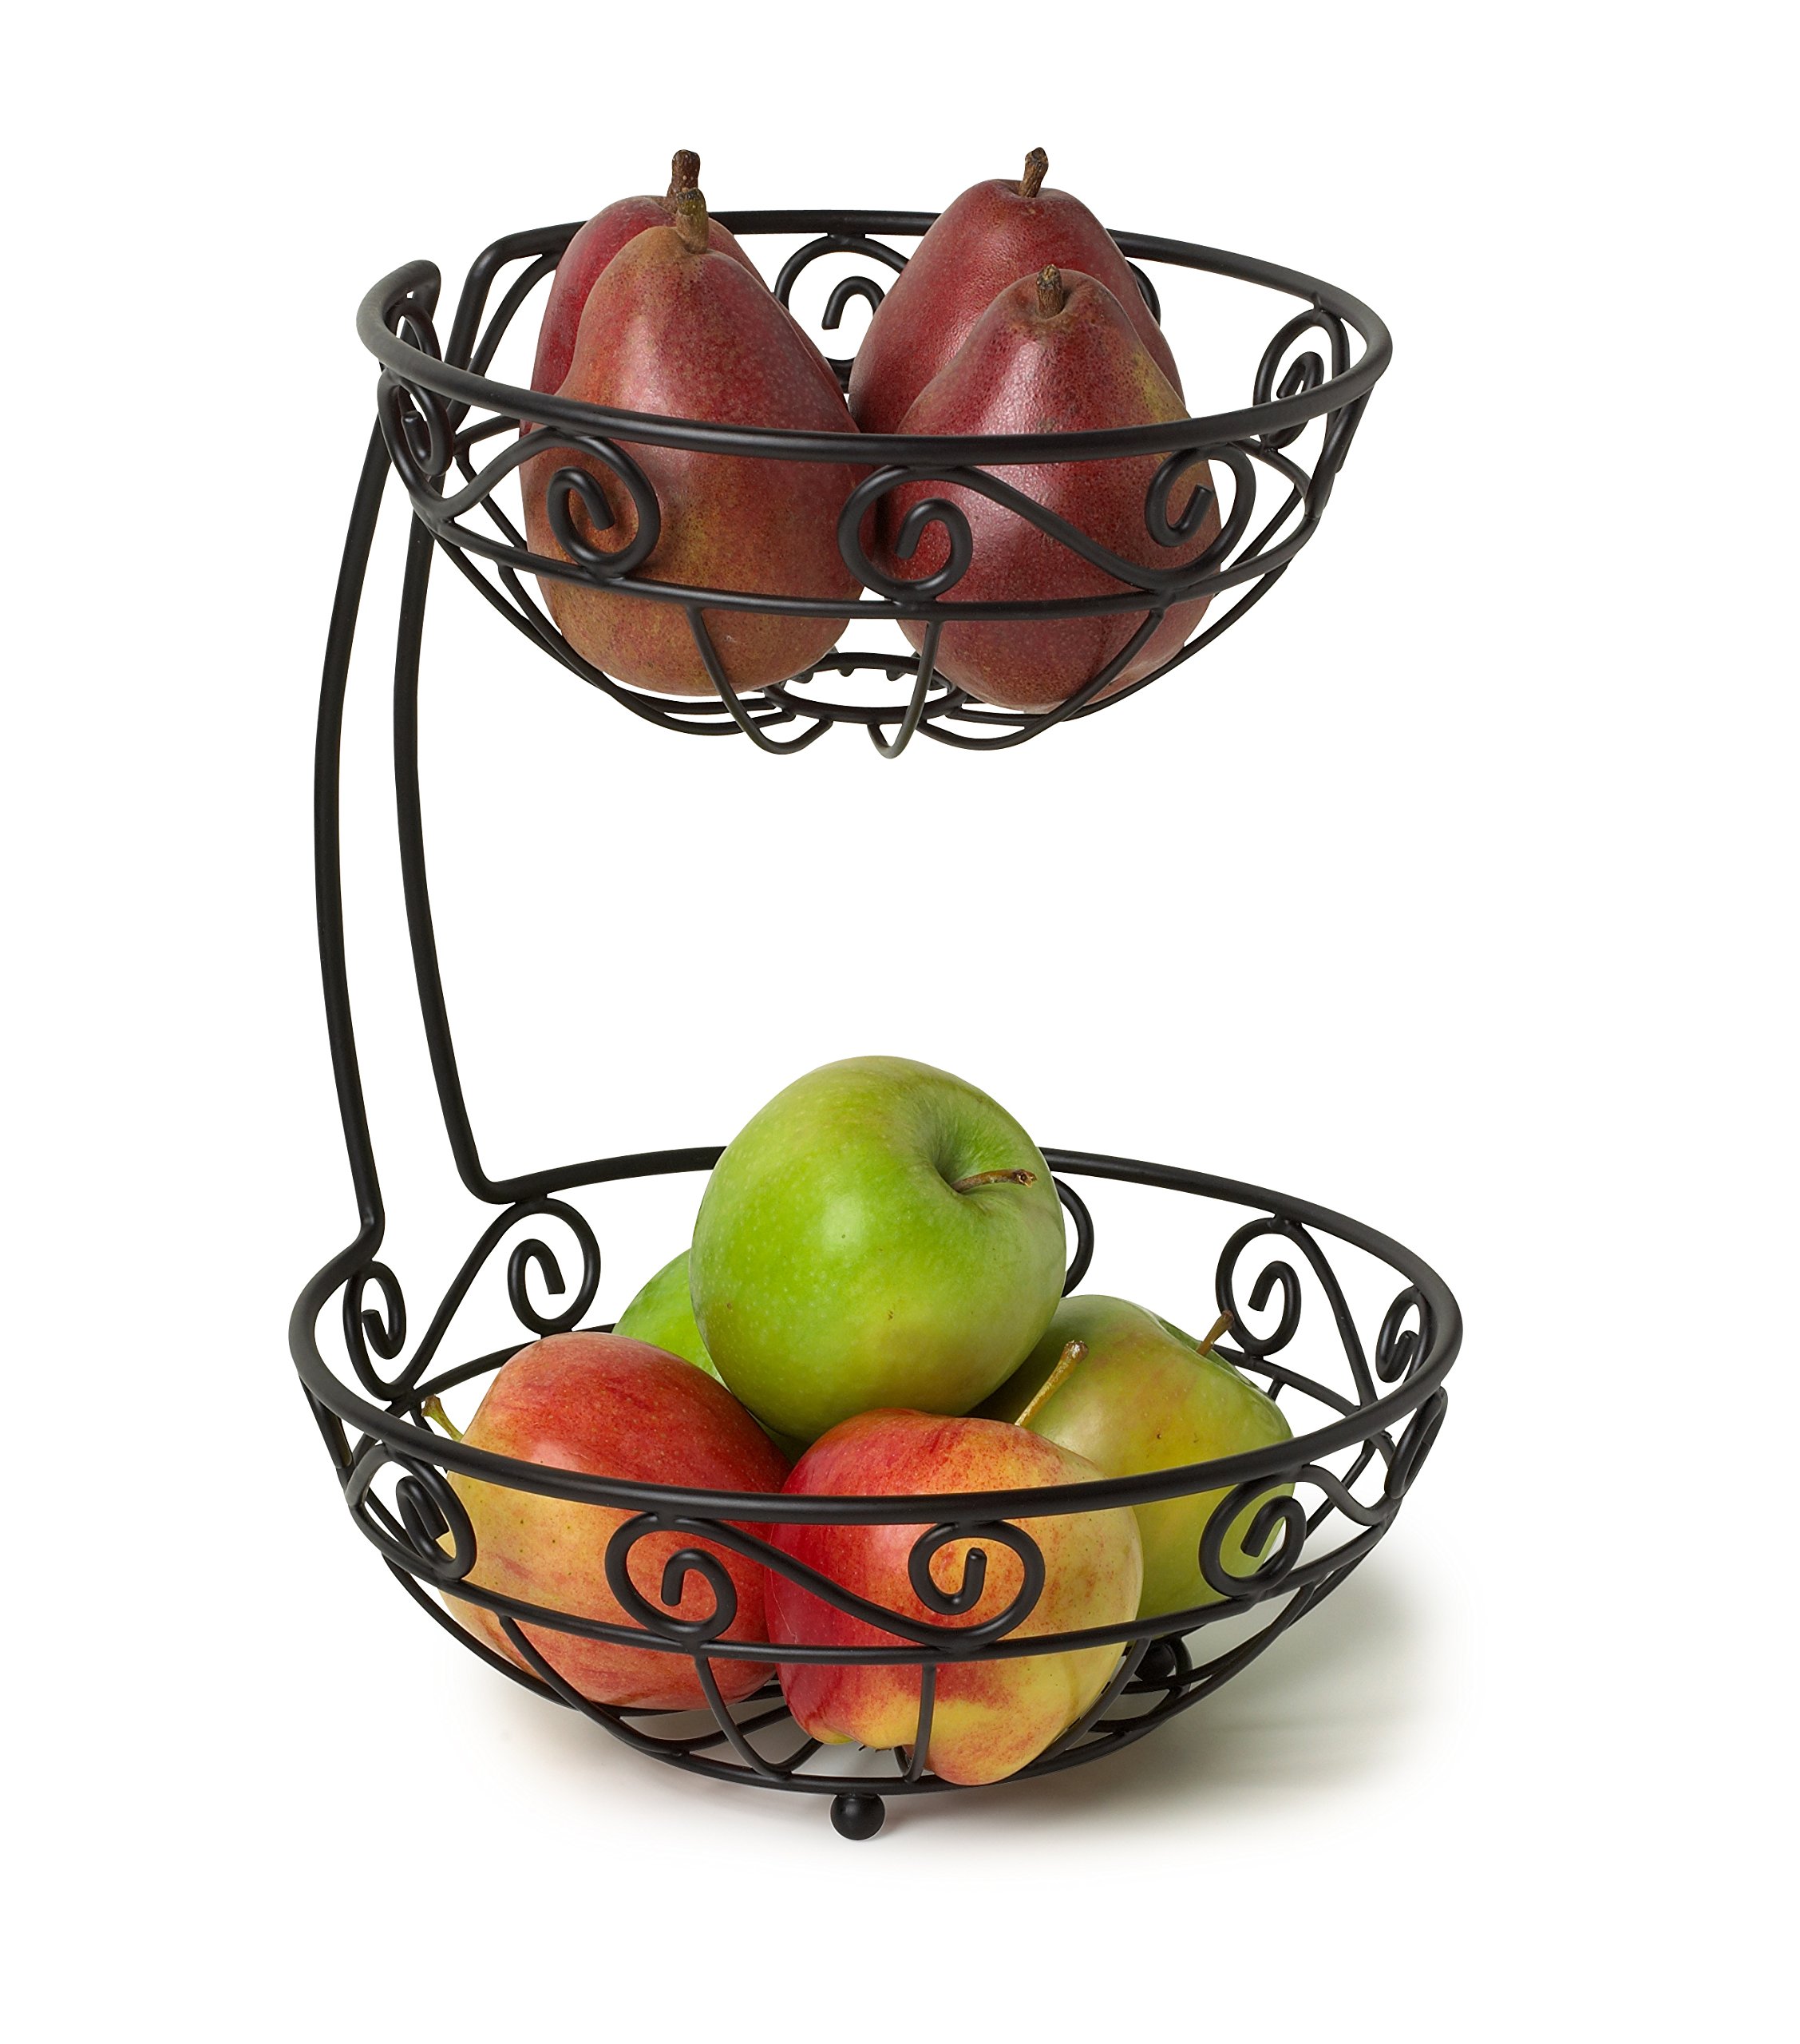 Spectrum Scroll Fruit Stand 2-Tier (Black) - Kitchen Counter Organizer for Produce & Food Storage